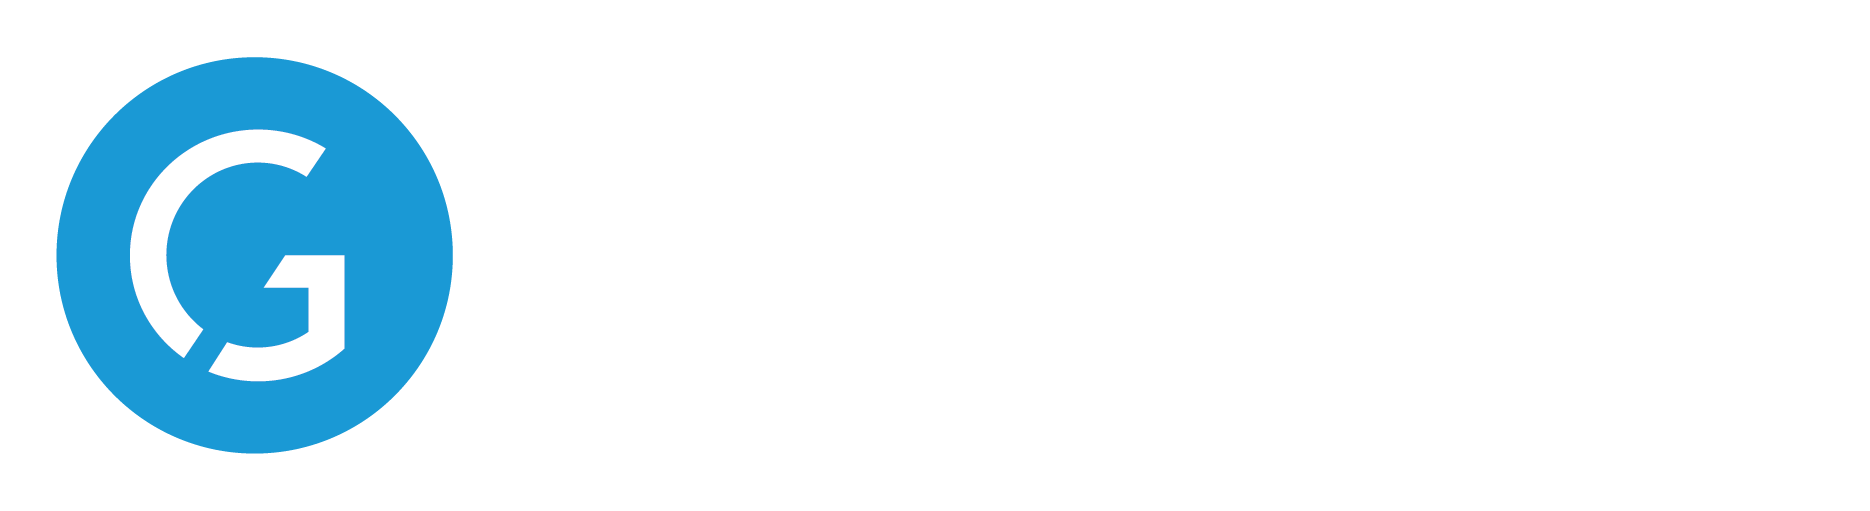 Gary Covert Consulting